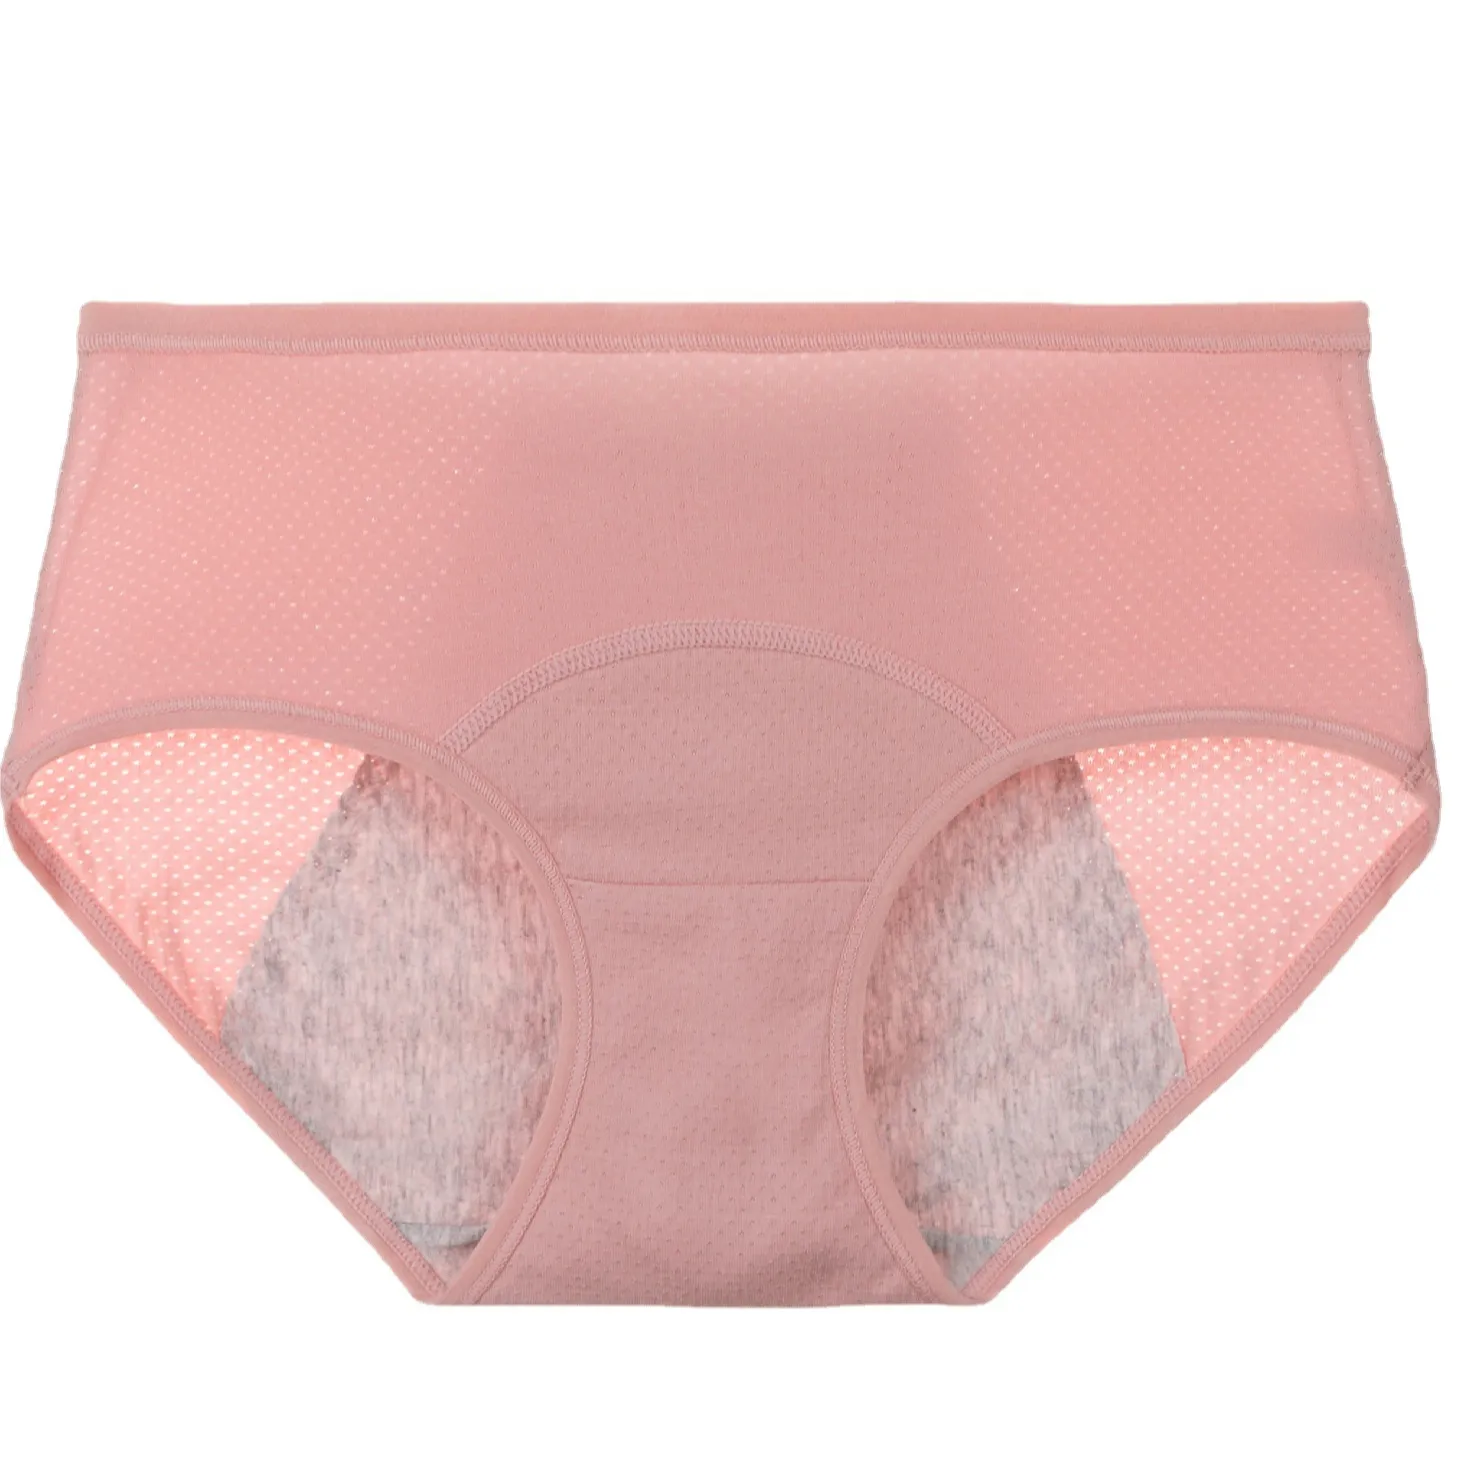 Hot Sale Women's Stereo Cutting Environmental Protection Dyeing Panties